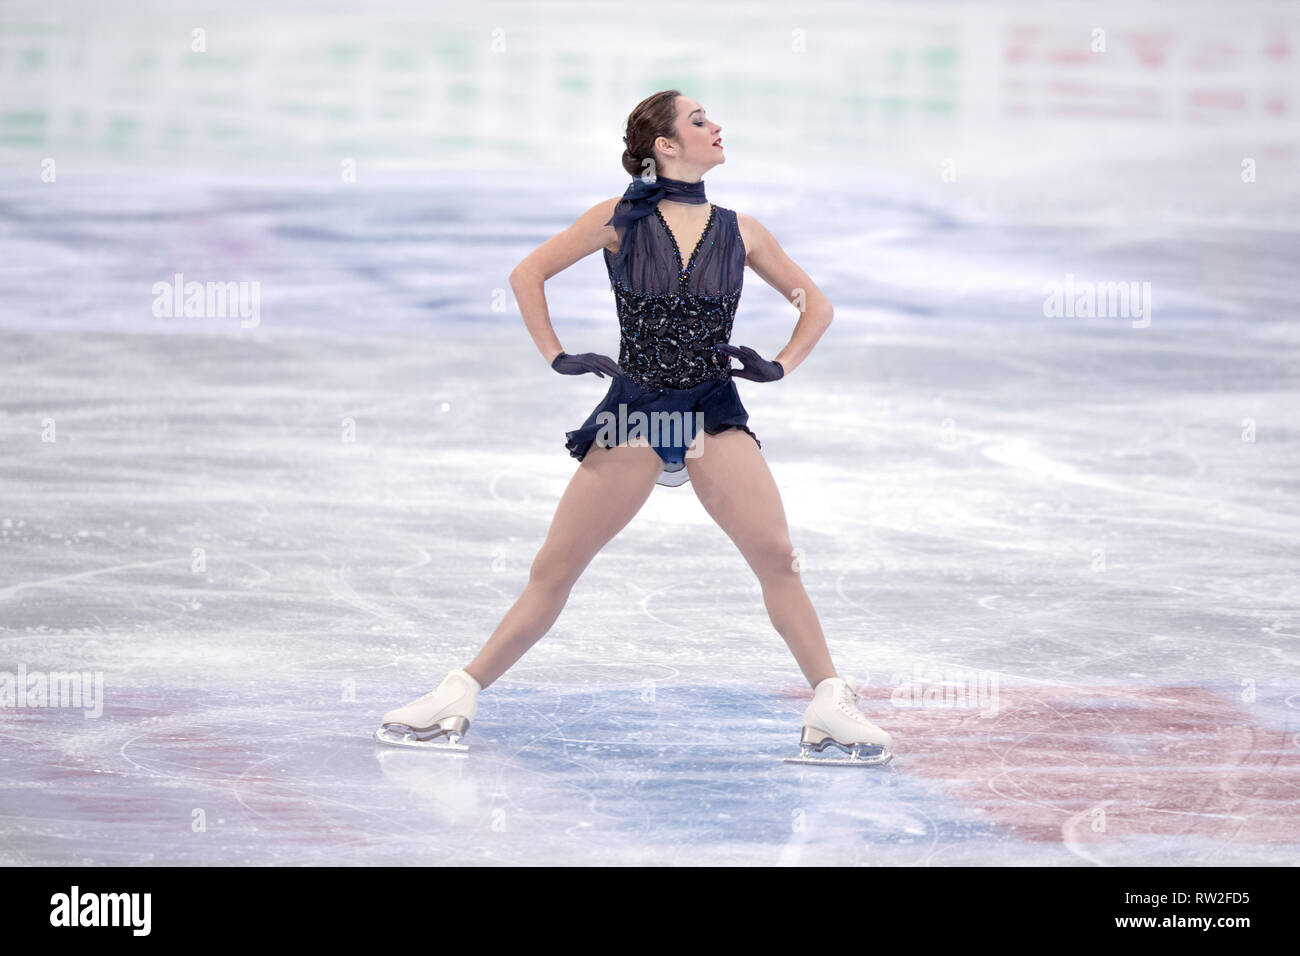 Kaetlyn Osmond from Canada during 2017 world figure skating championships Stock Photo